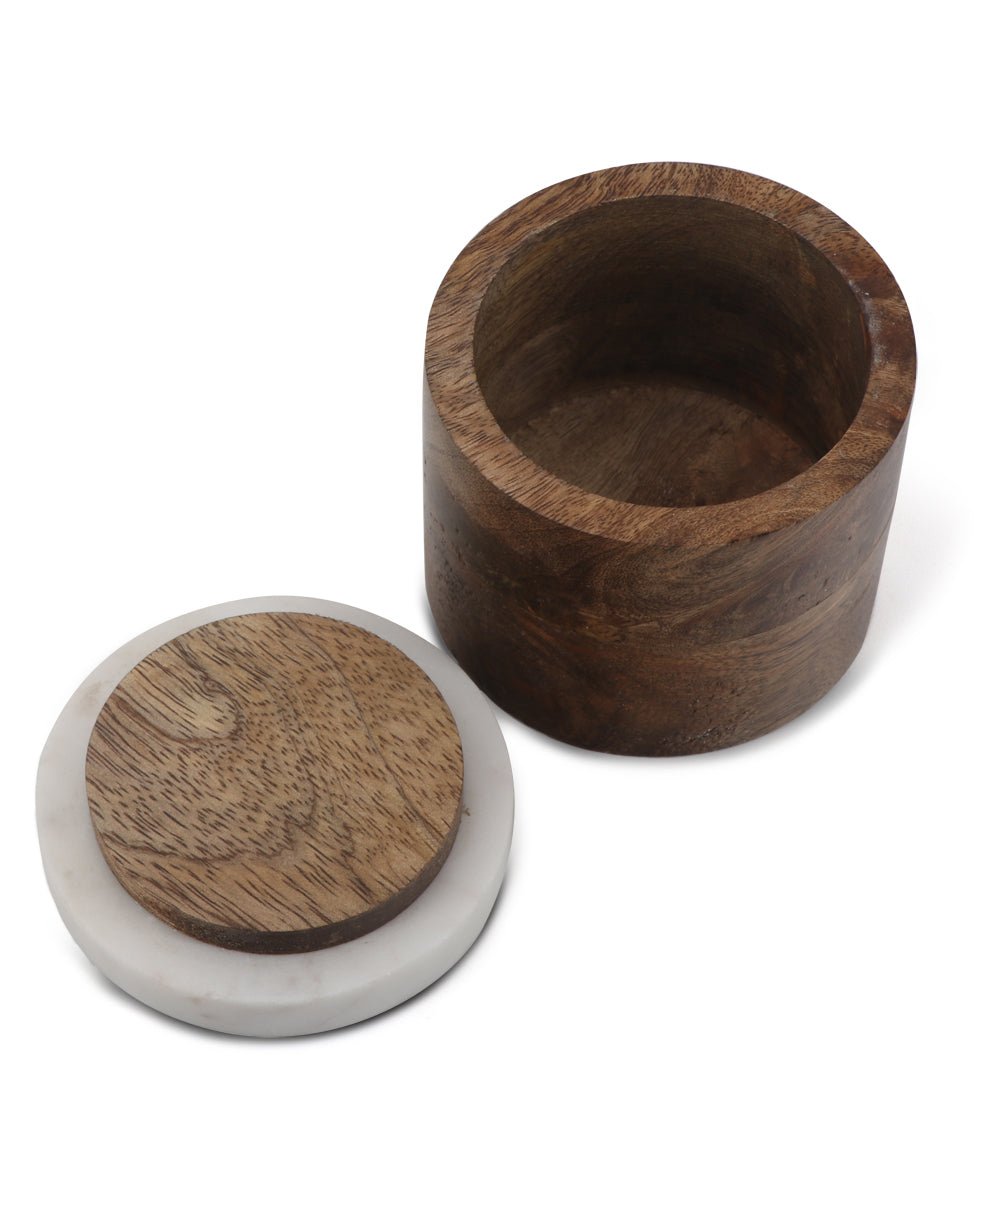 Fairtrade Marble Lid Celestial Wood Small Box - Gift Boxes & Tins